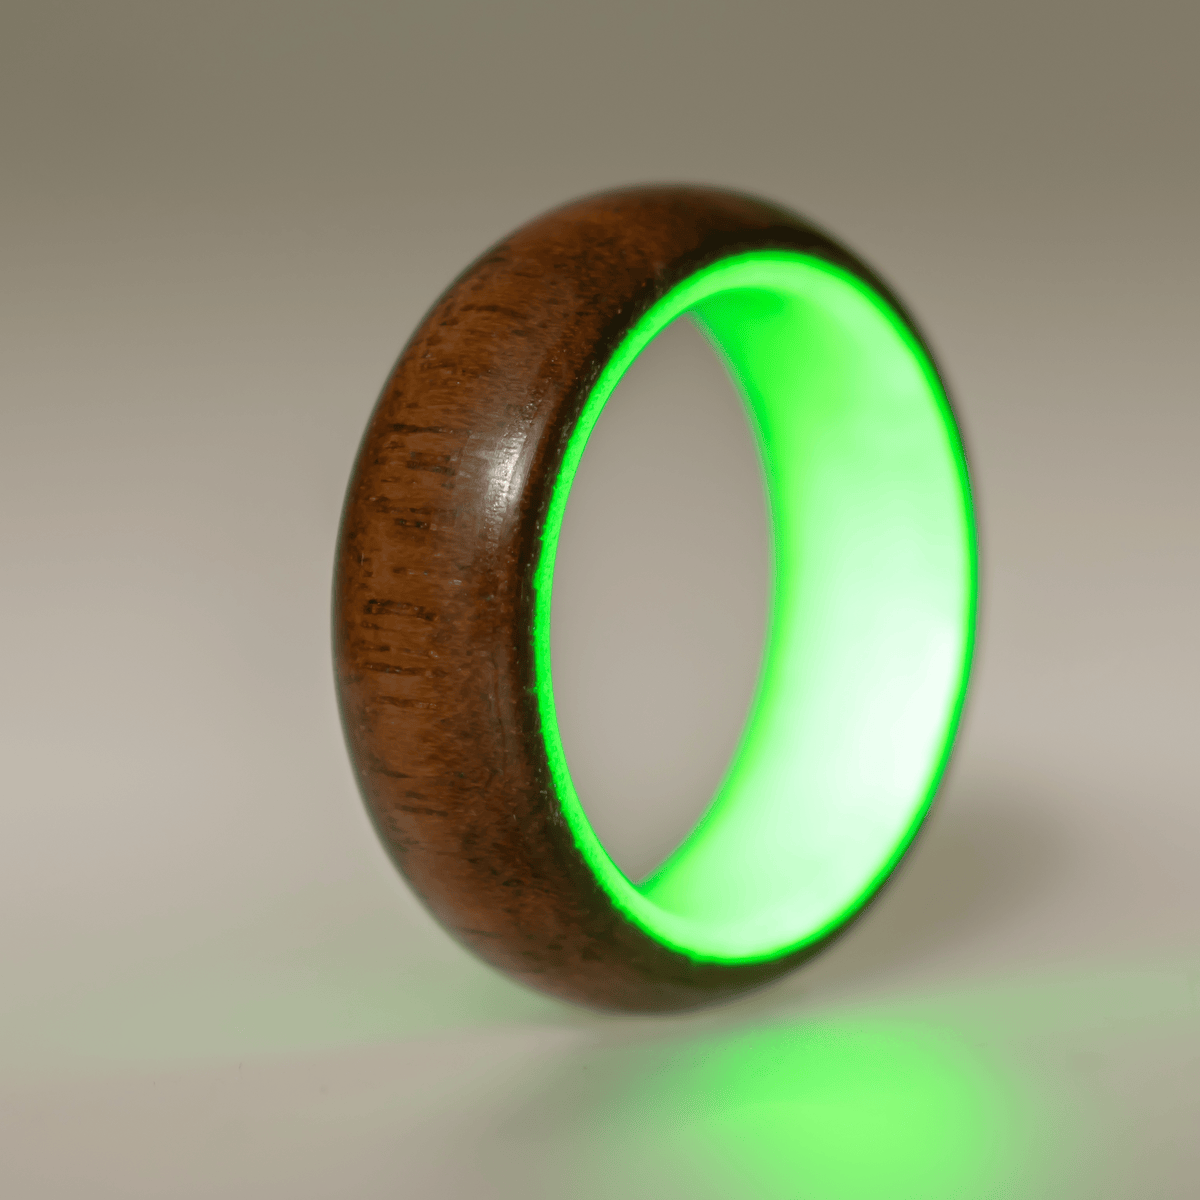 Green glow ring with walnut wood exterior. 